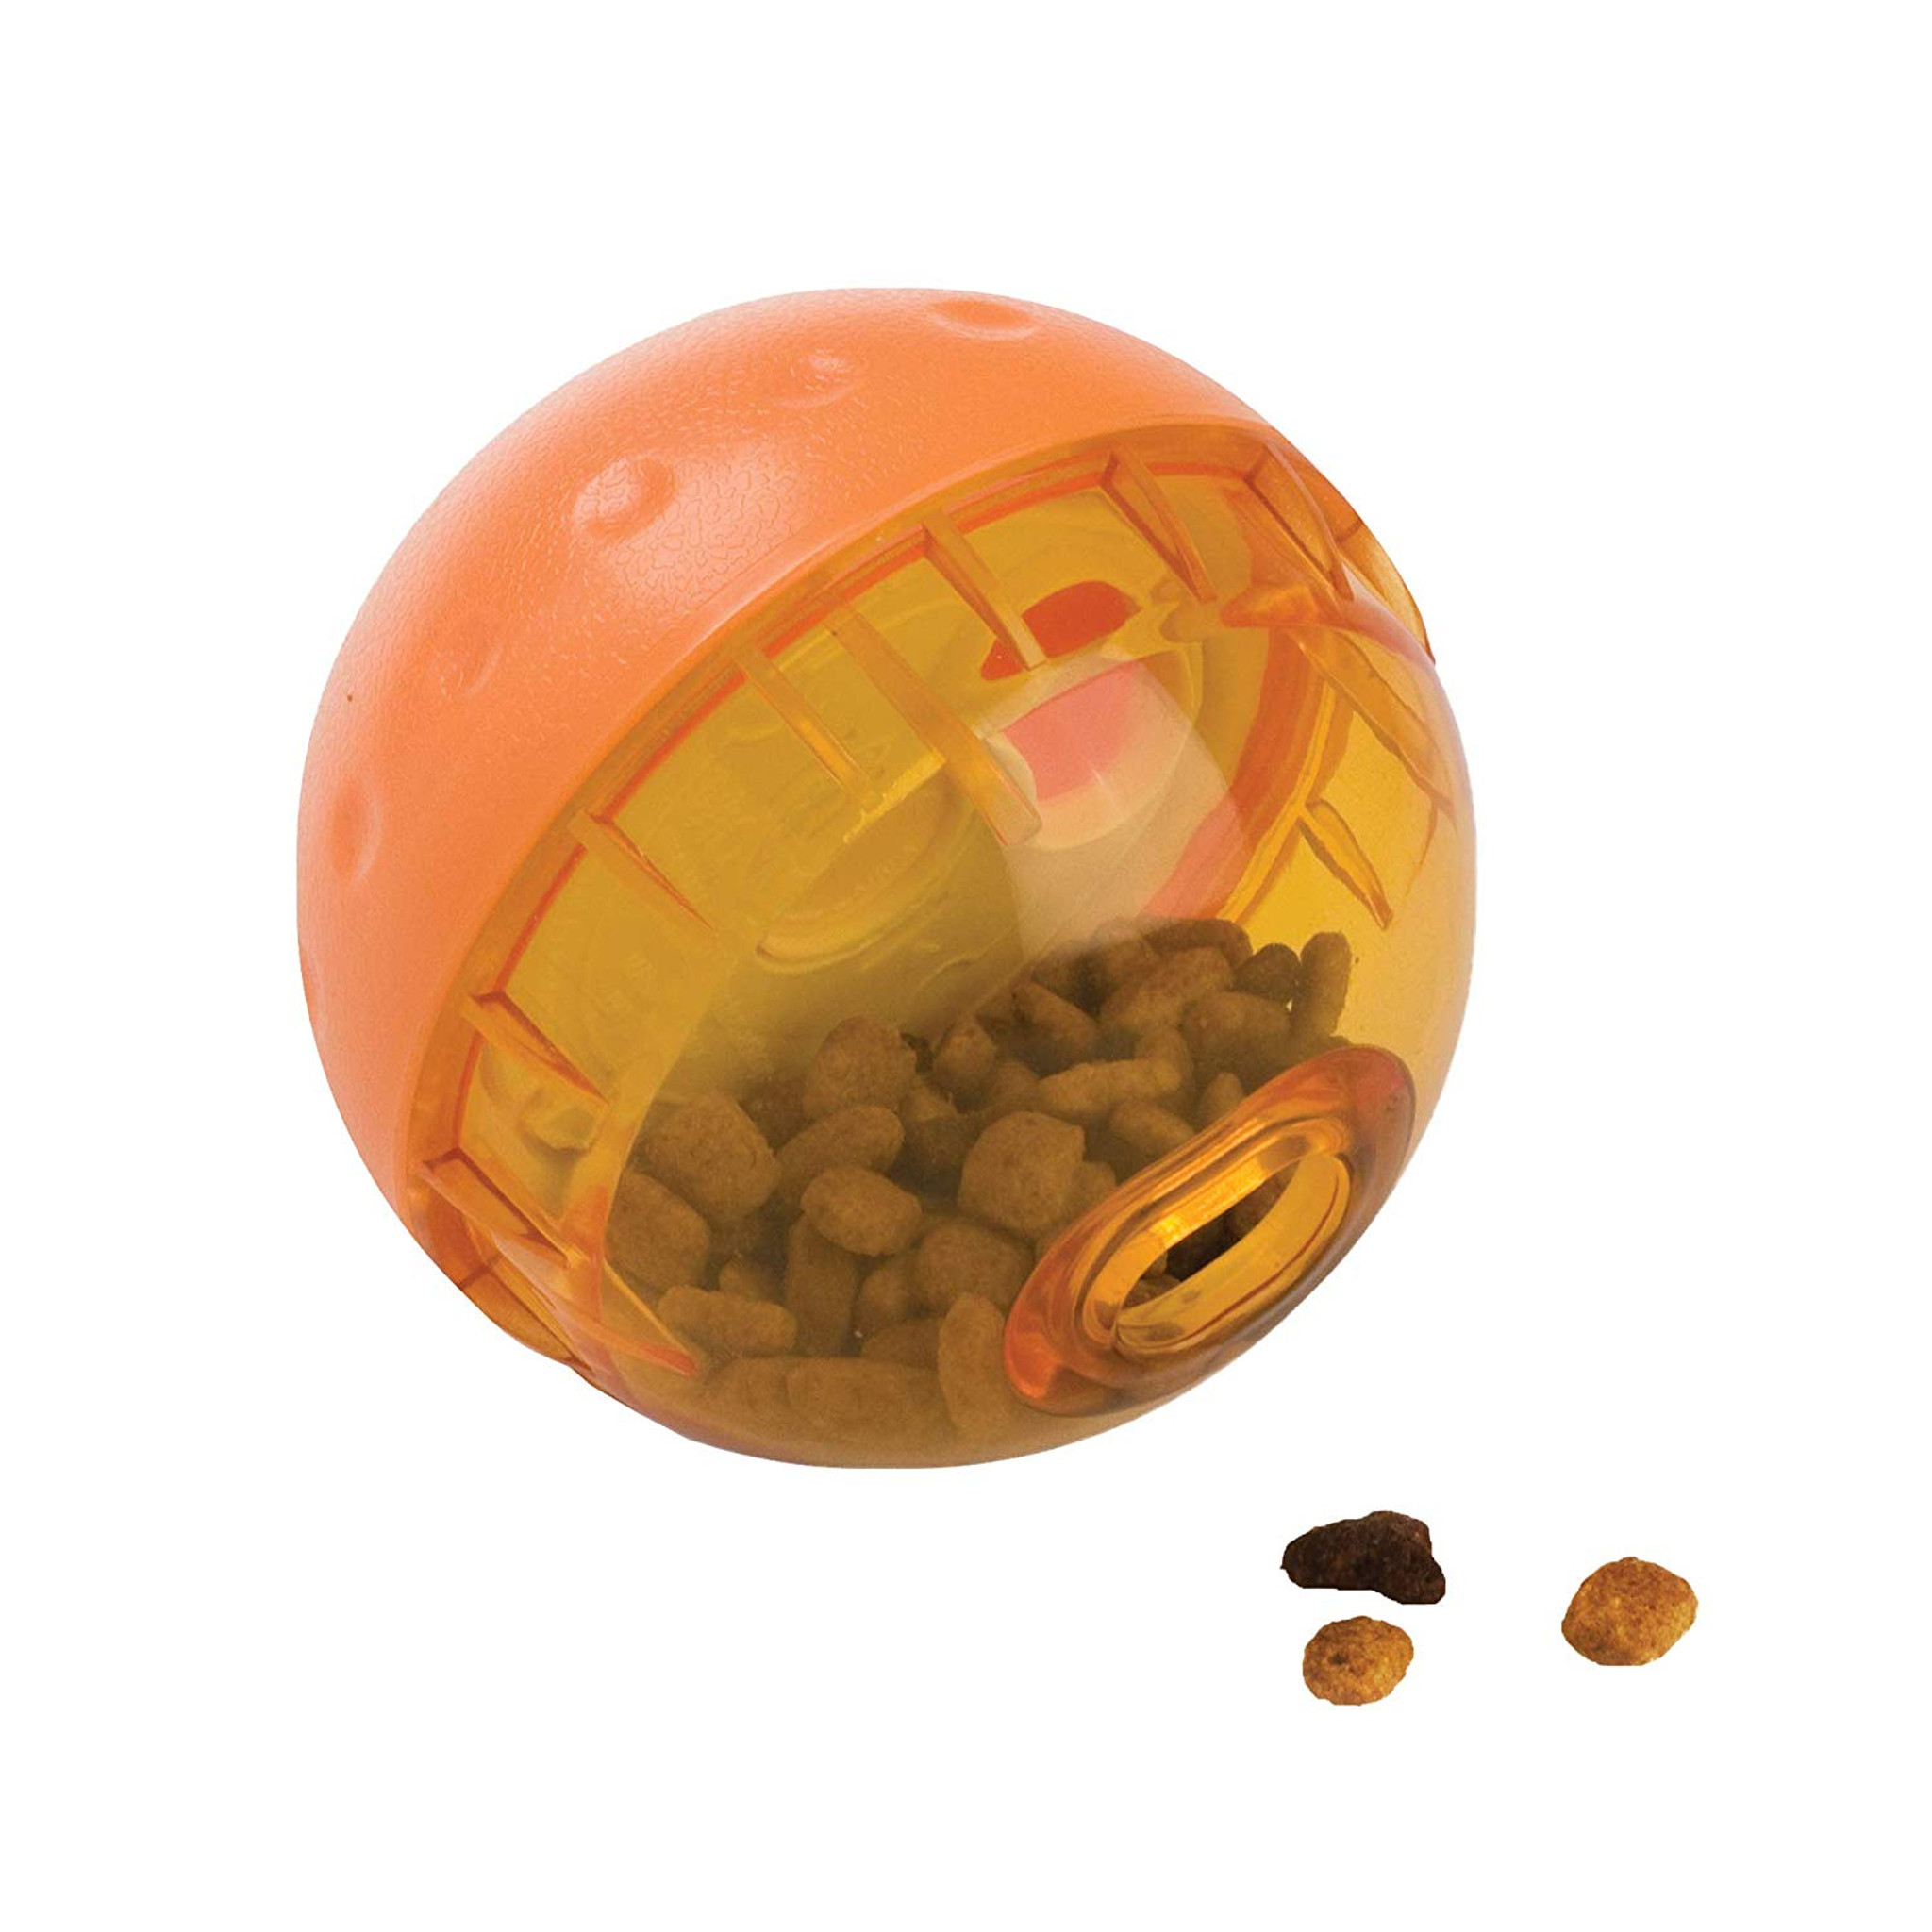 OurPets IQ Treat Ball Food Dispensing Toy for Dogs 4 inch